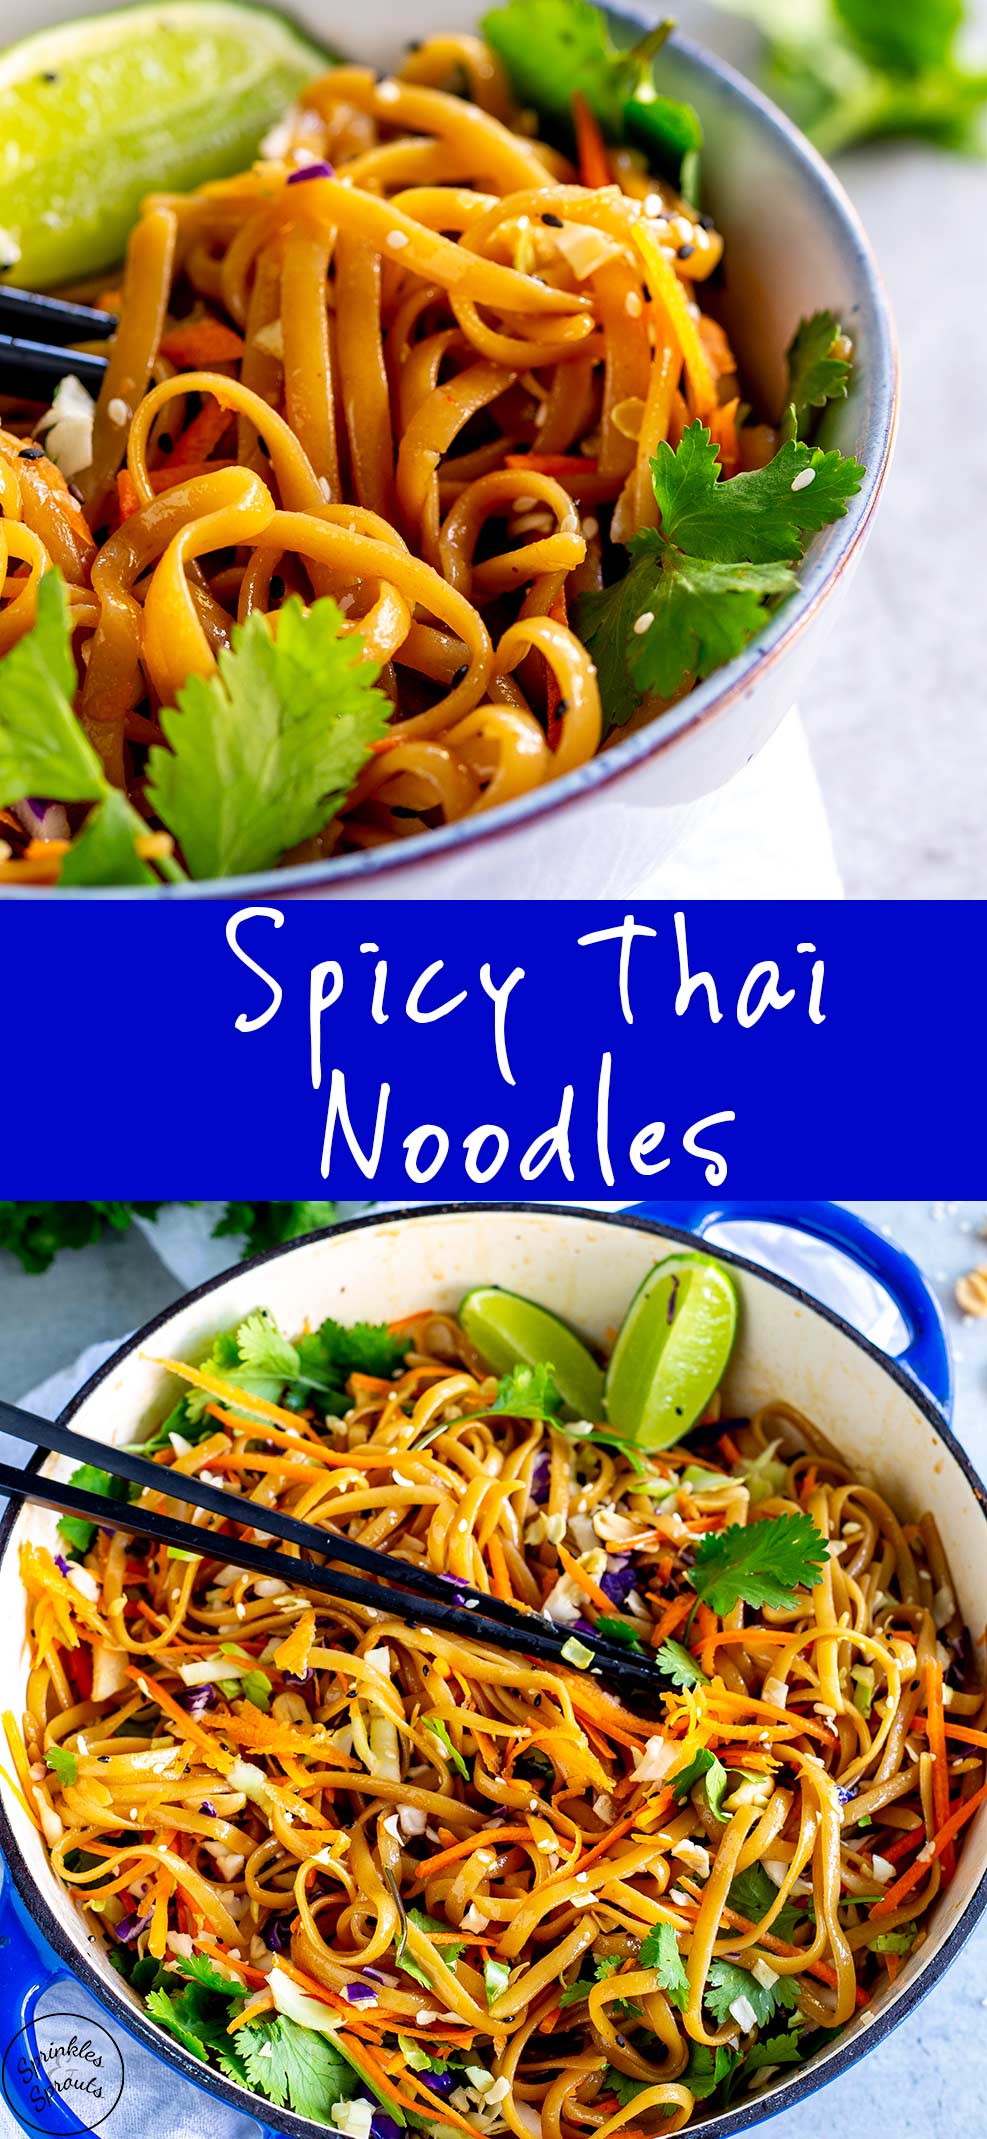 two pictures of Thai noodles with text in the middle